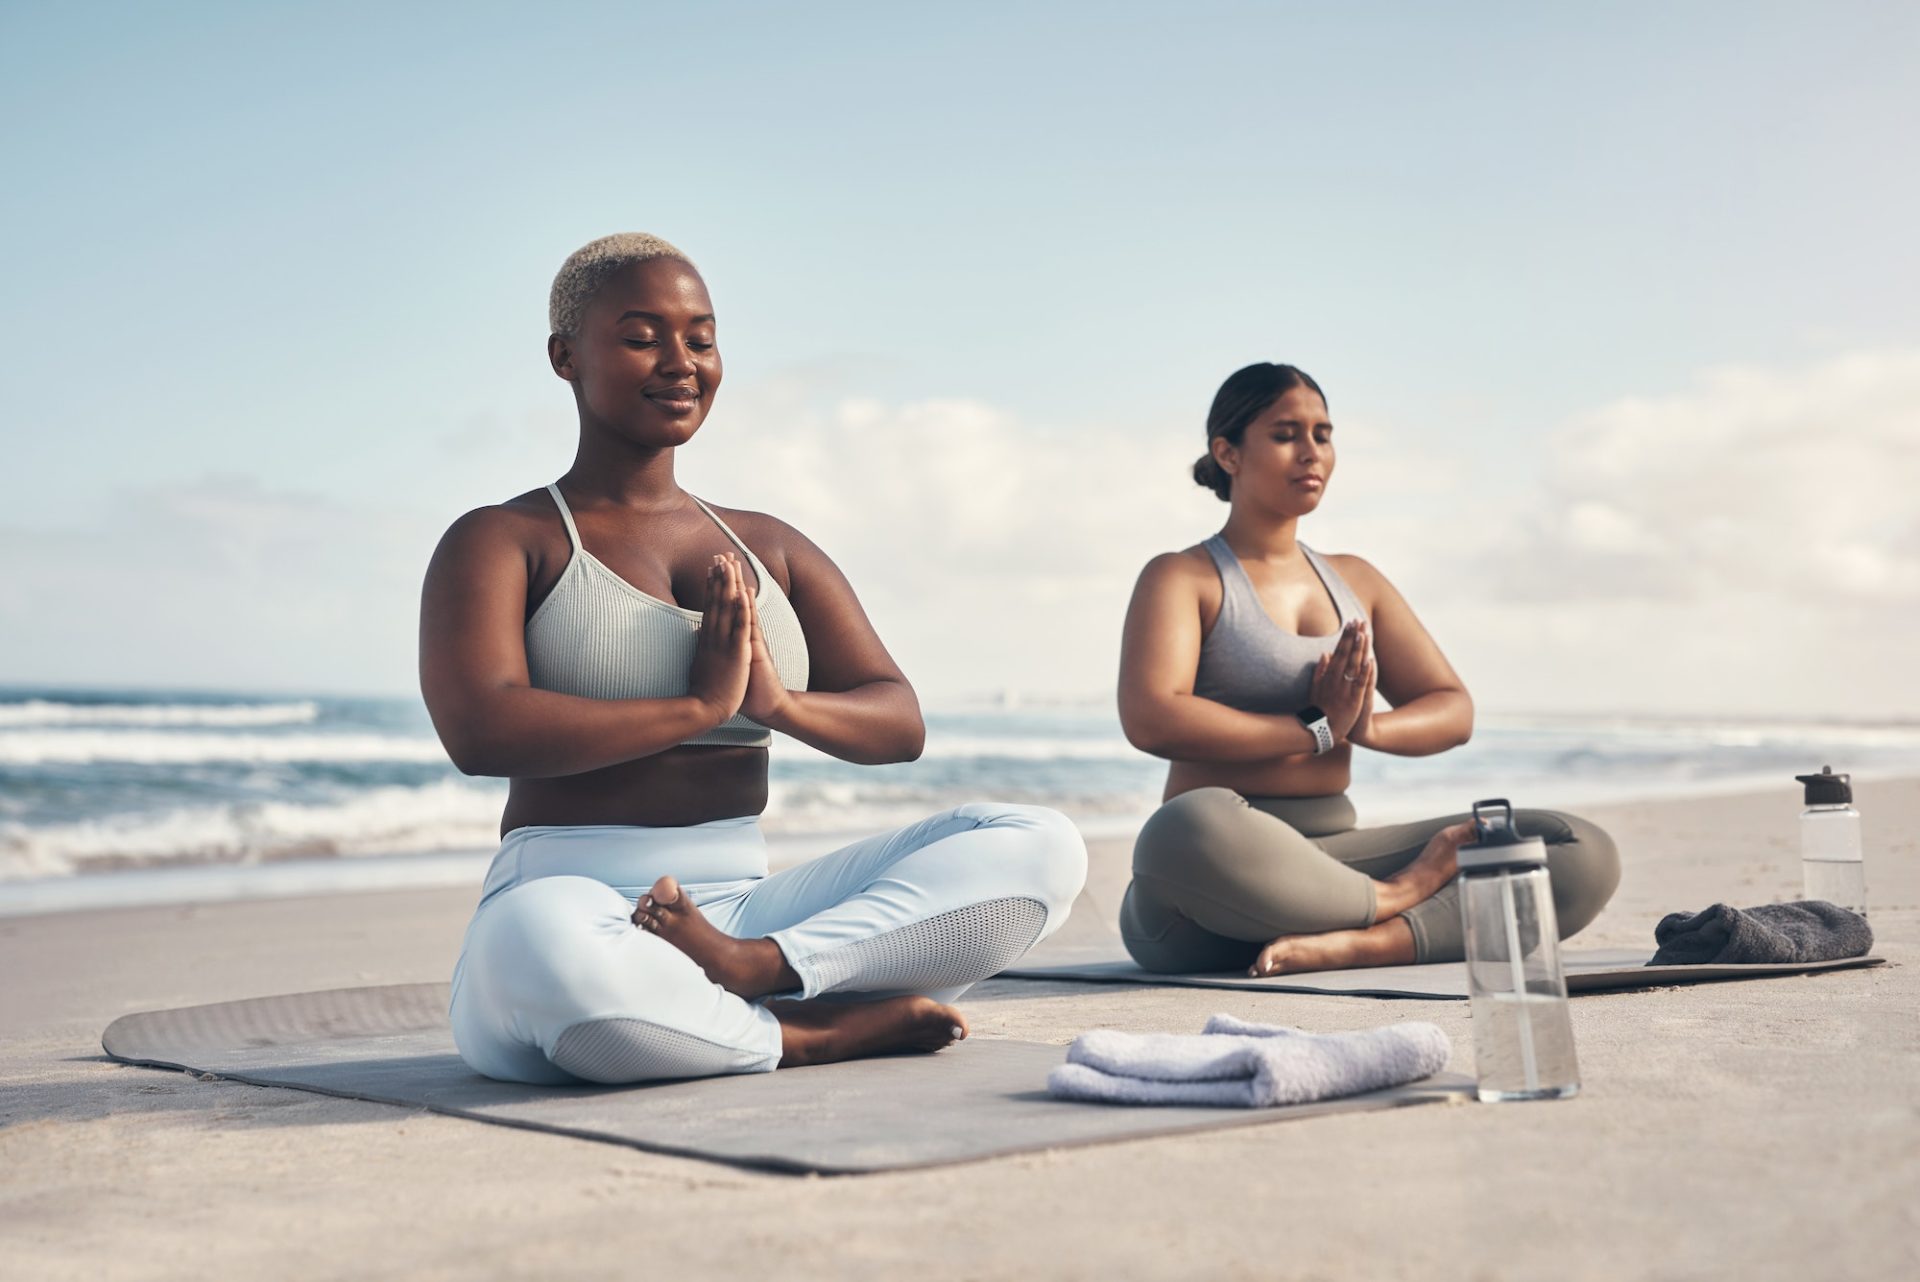 Shot of two young women meditating during their yoga routine on the beach